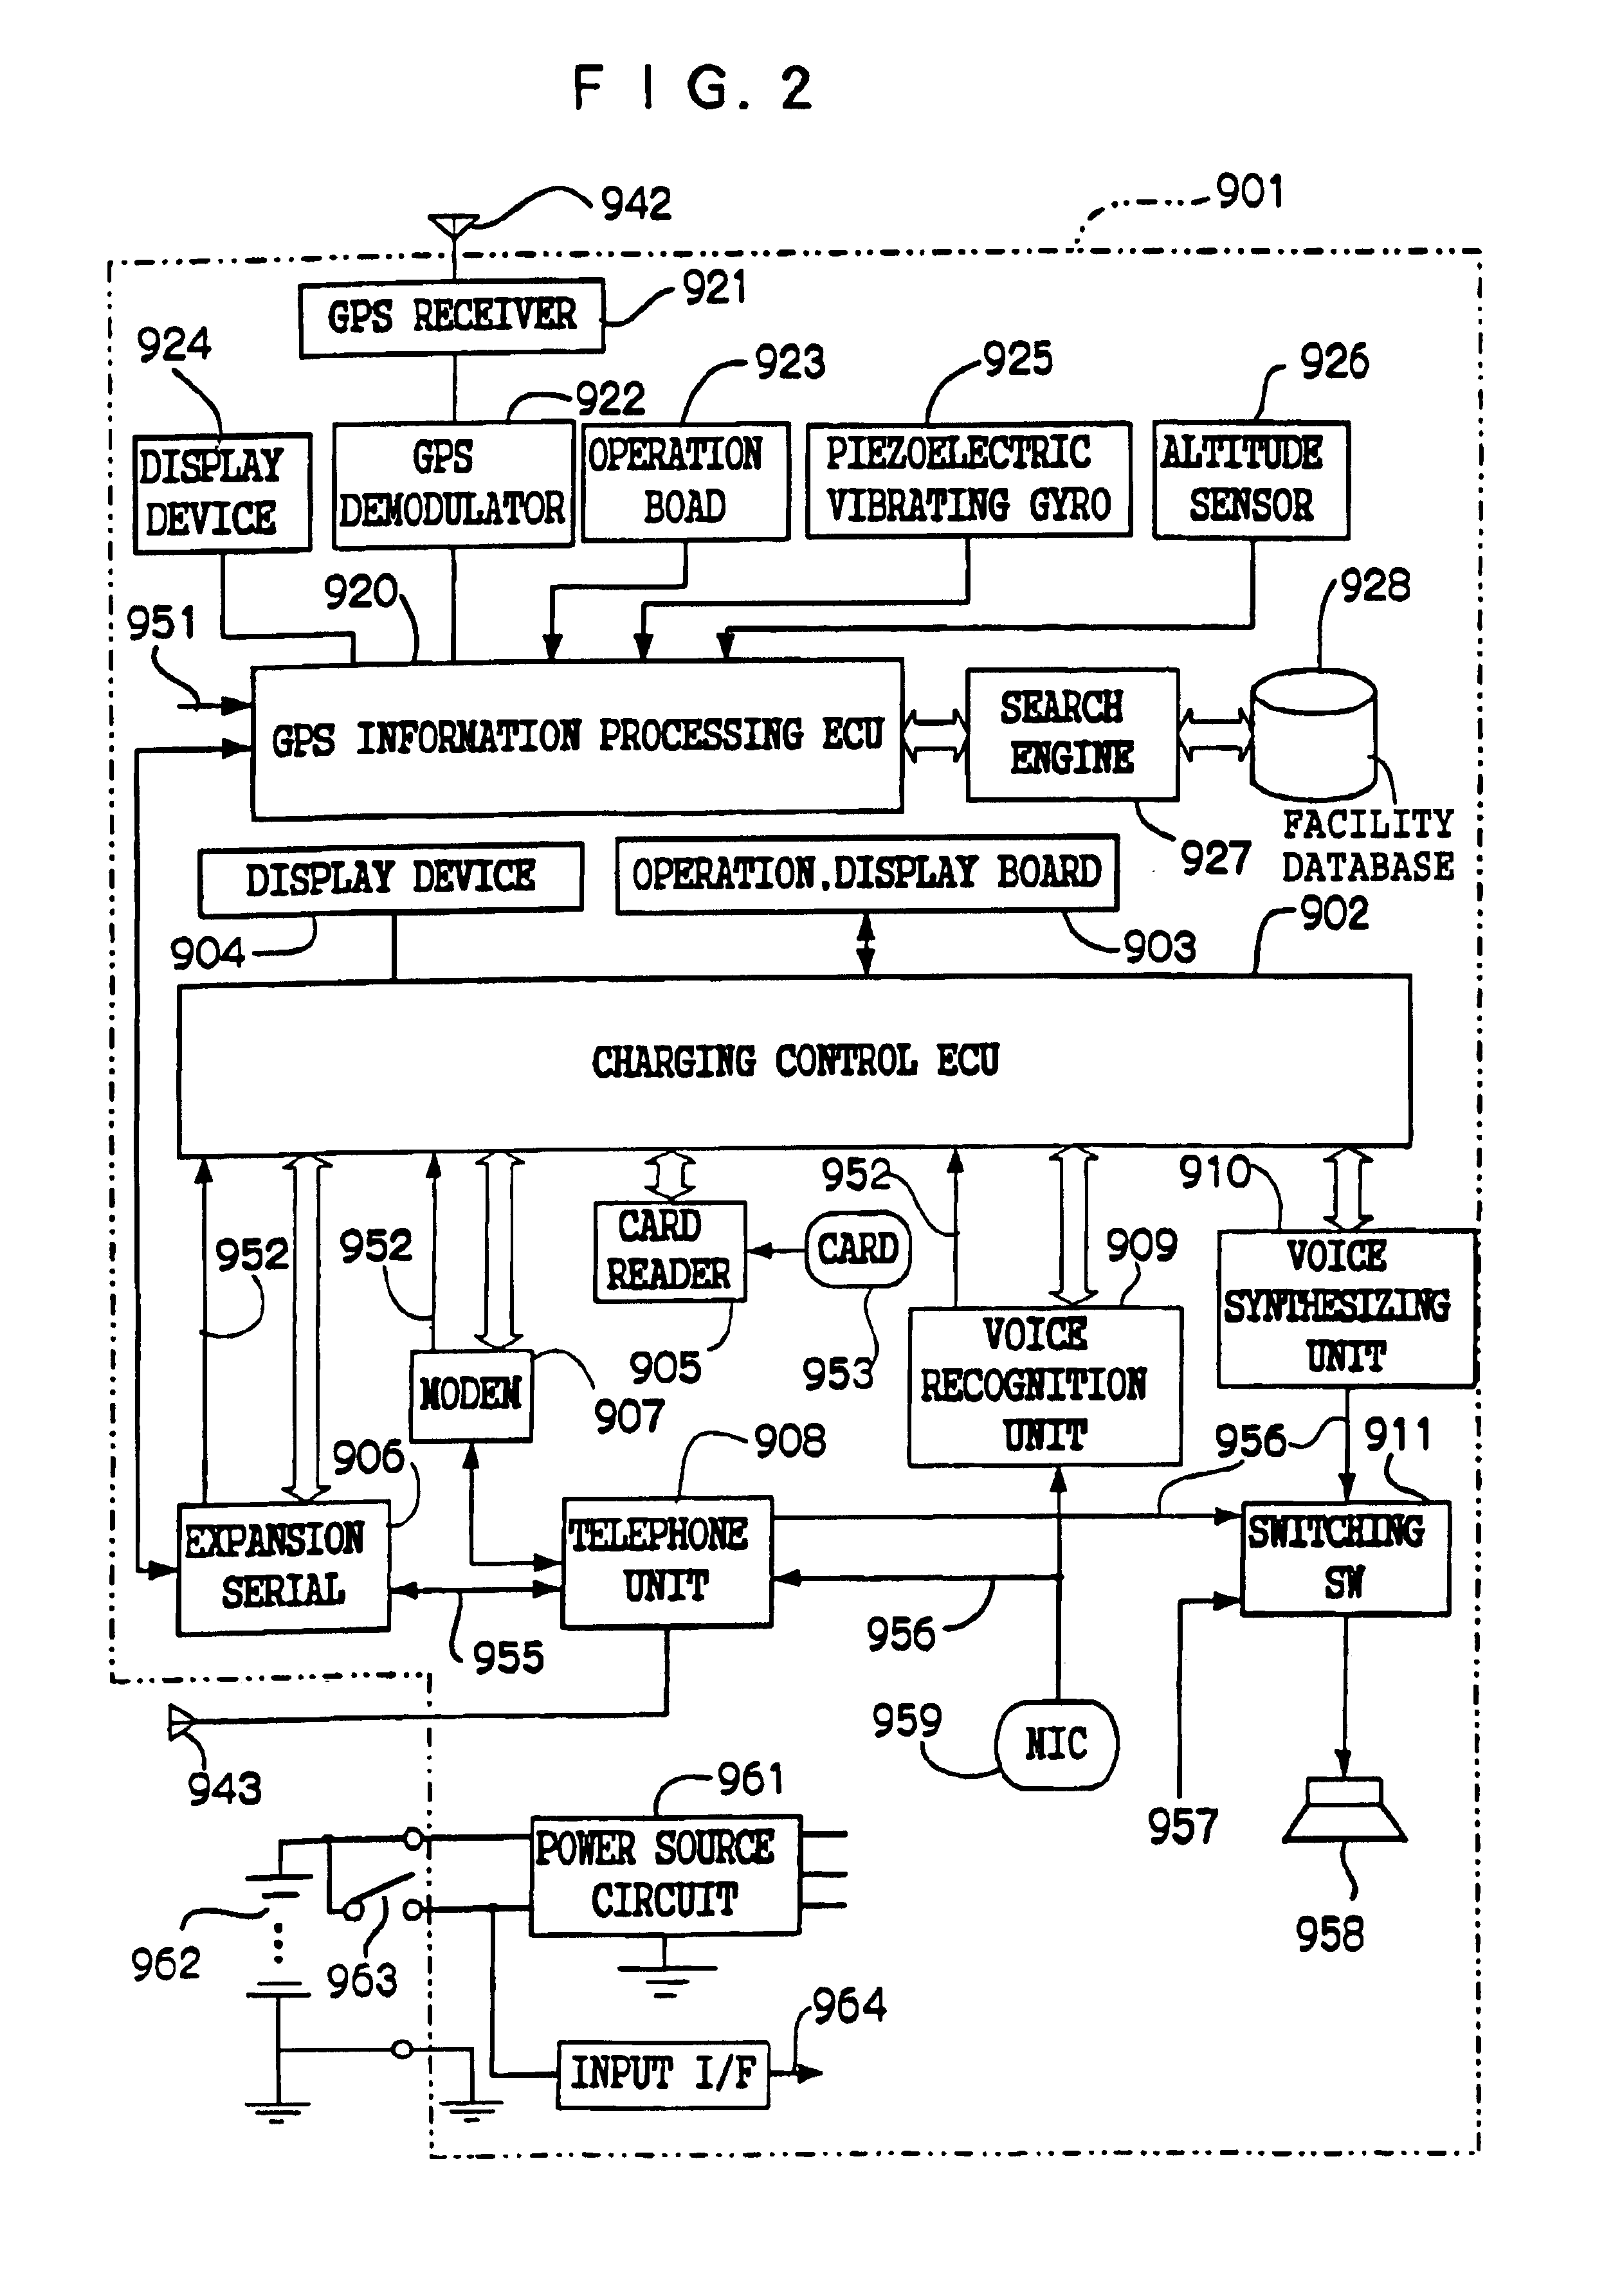 Charging system which carries out data processing for fee payment